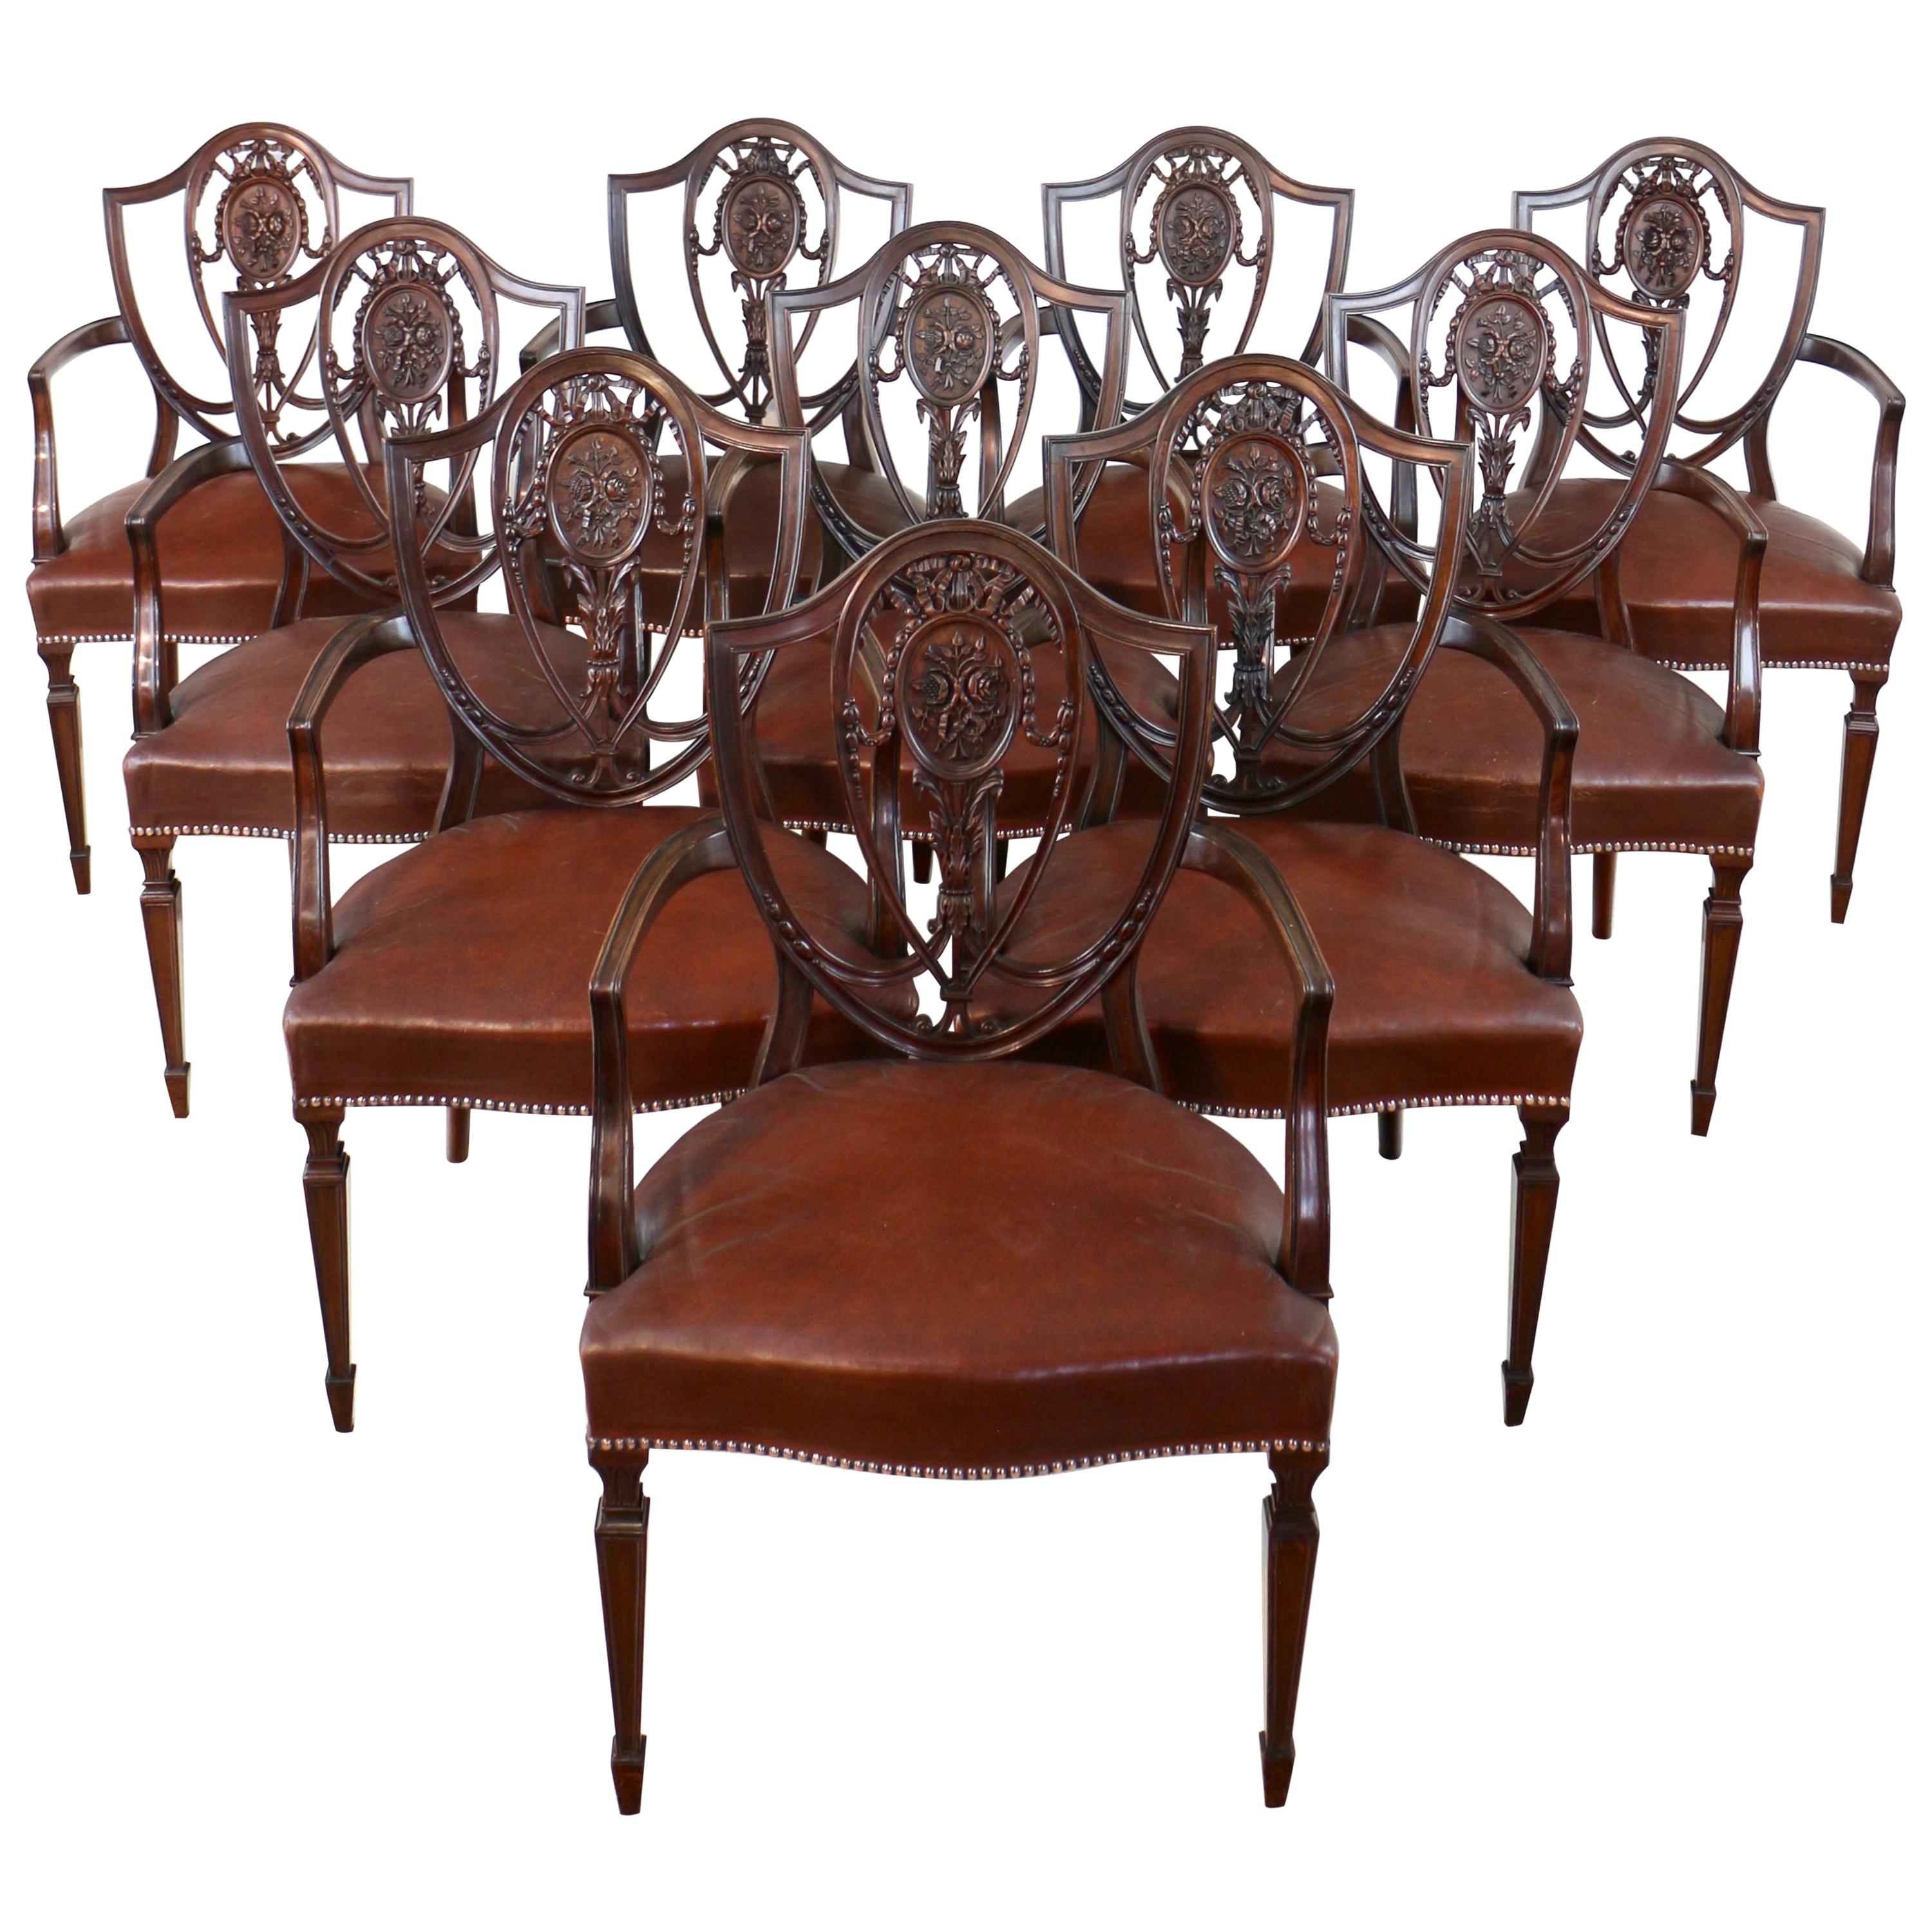 Set of 10 Antique English Victorian Hepplewhite Design Carver Dining Chairs